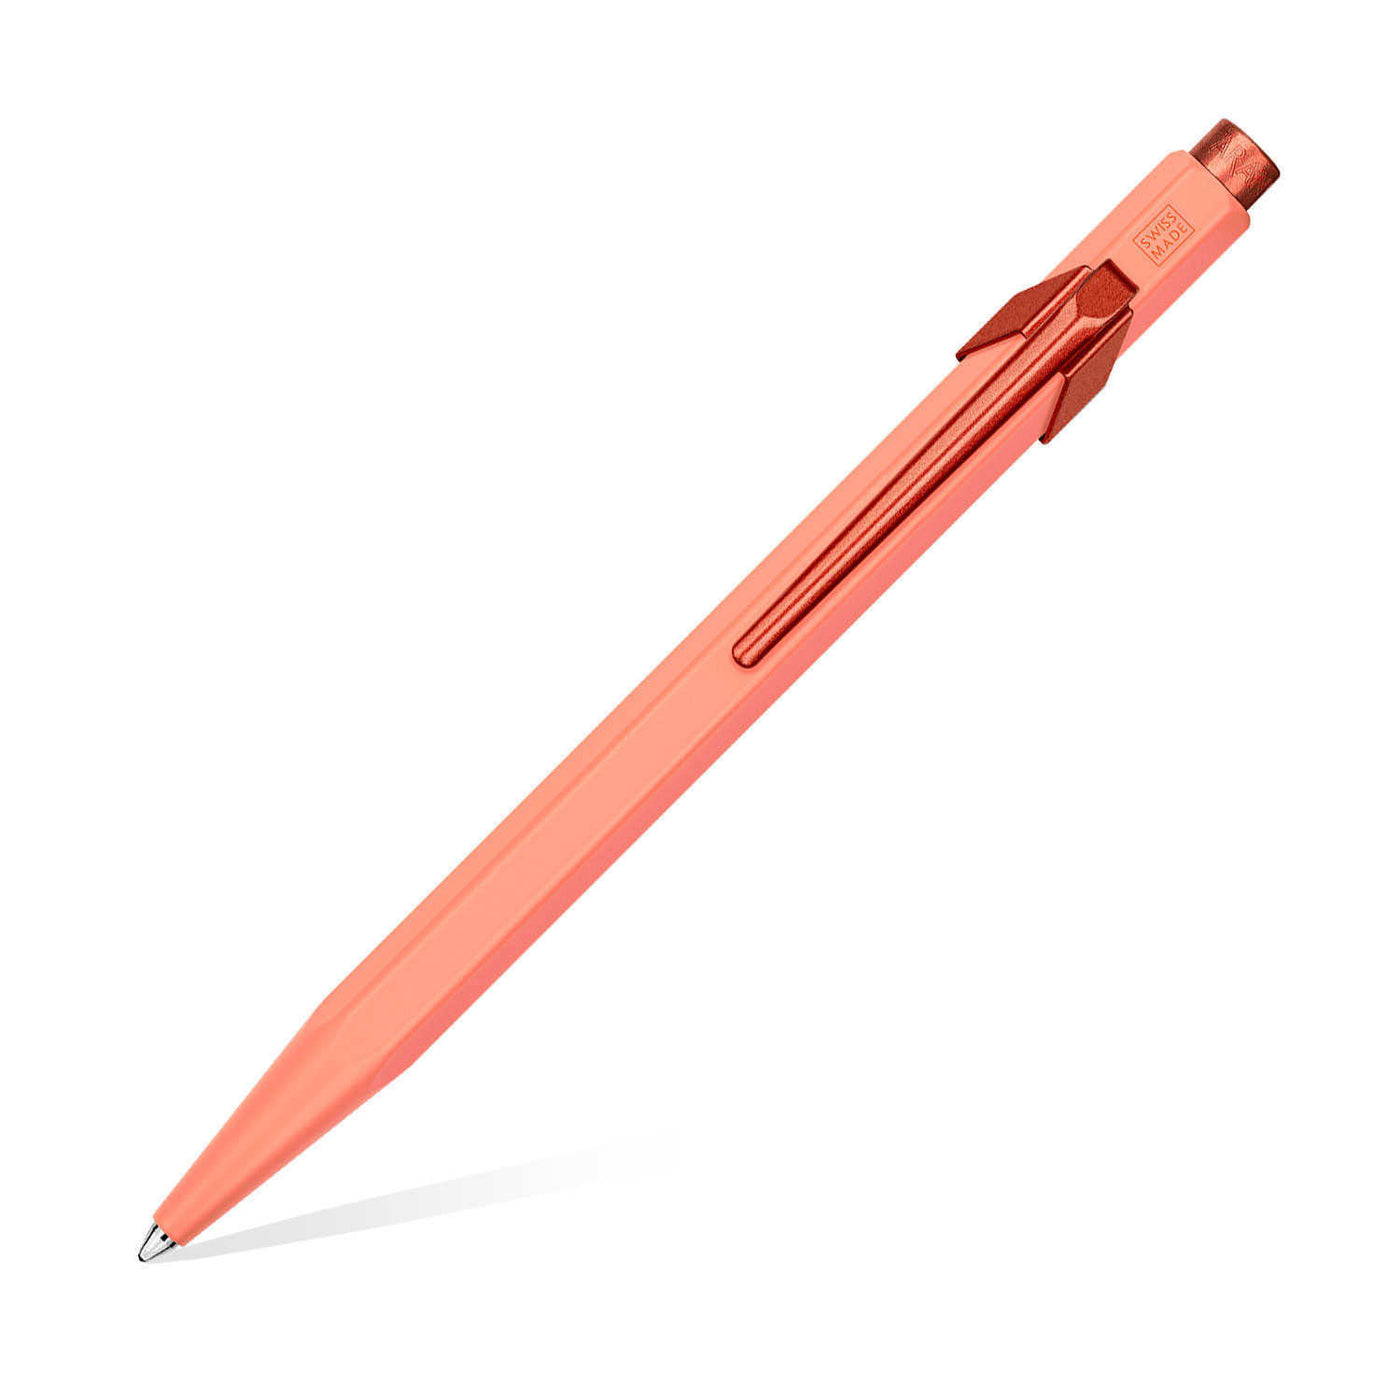 Caran d'Ache 849 Claim Your Style Ball Pen - Tangerine (Limited Edition) 1